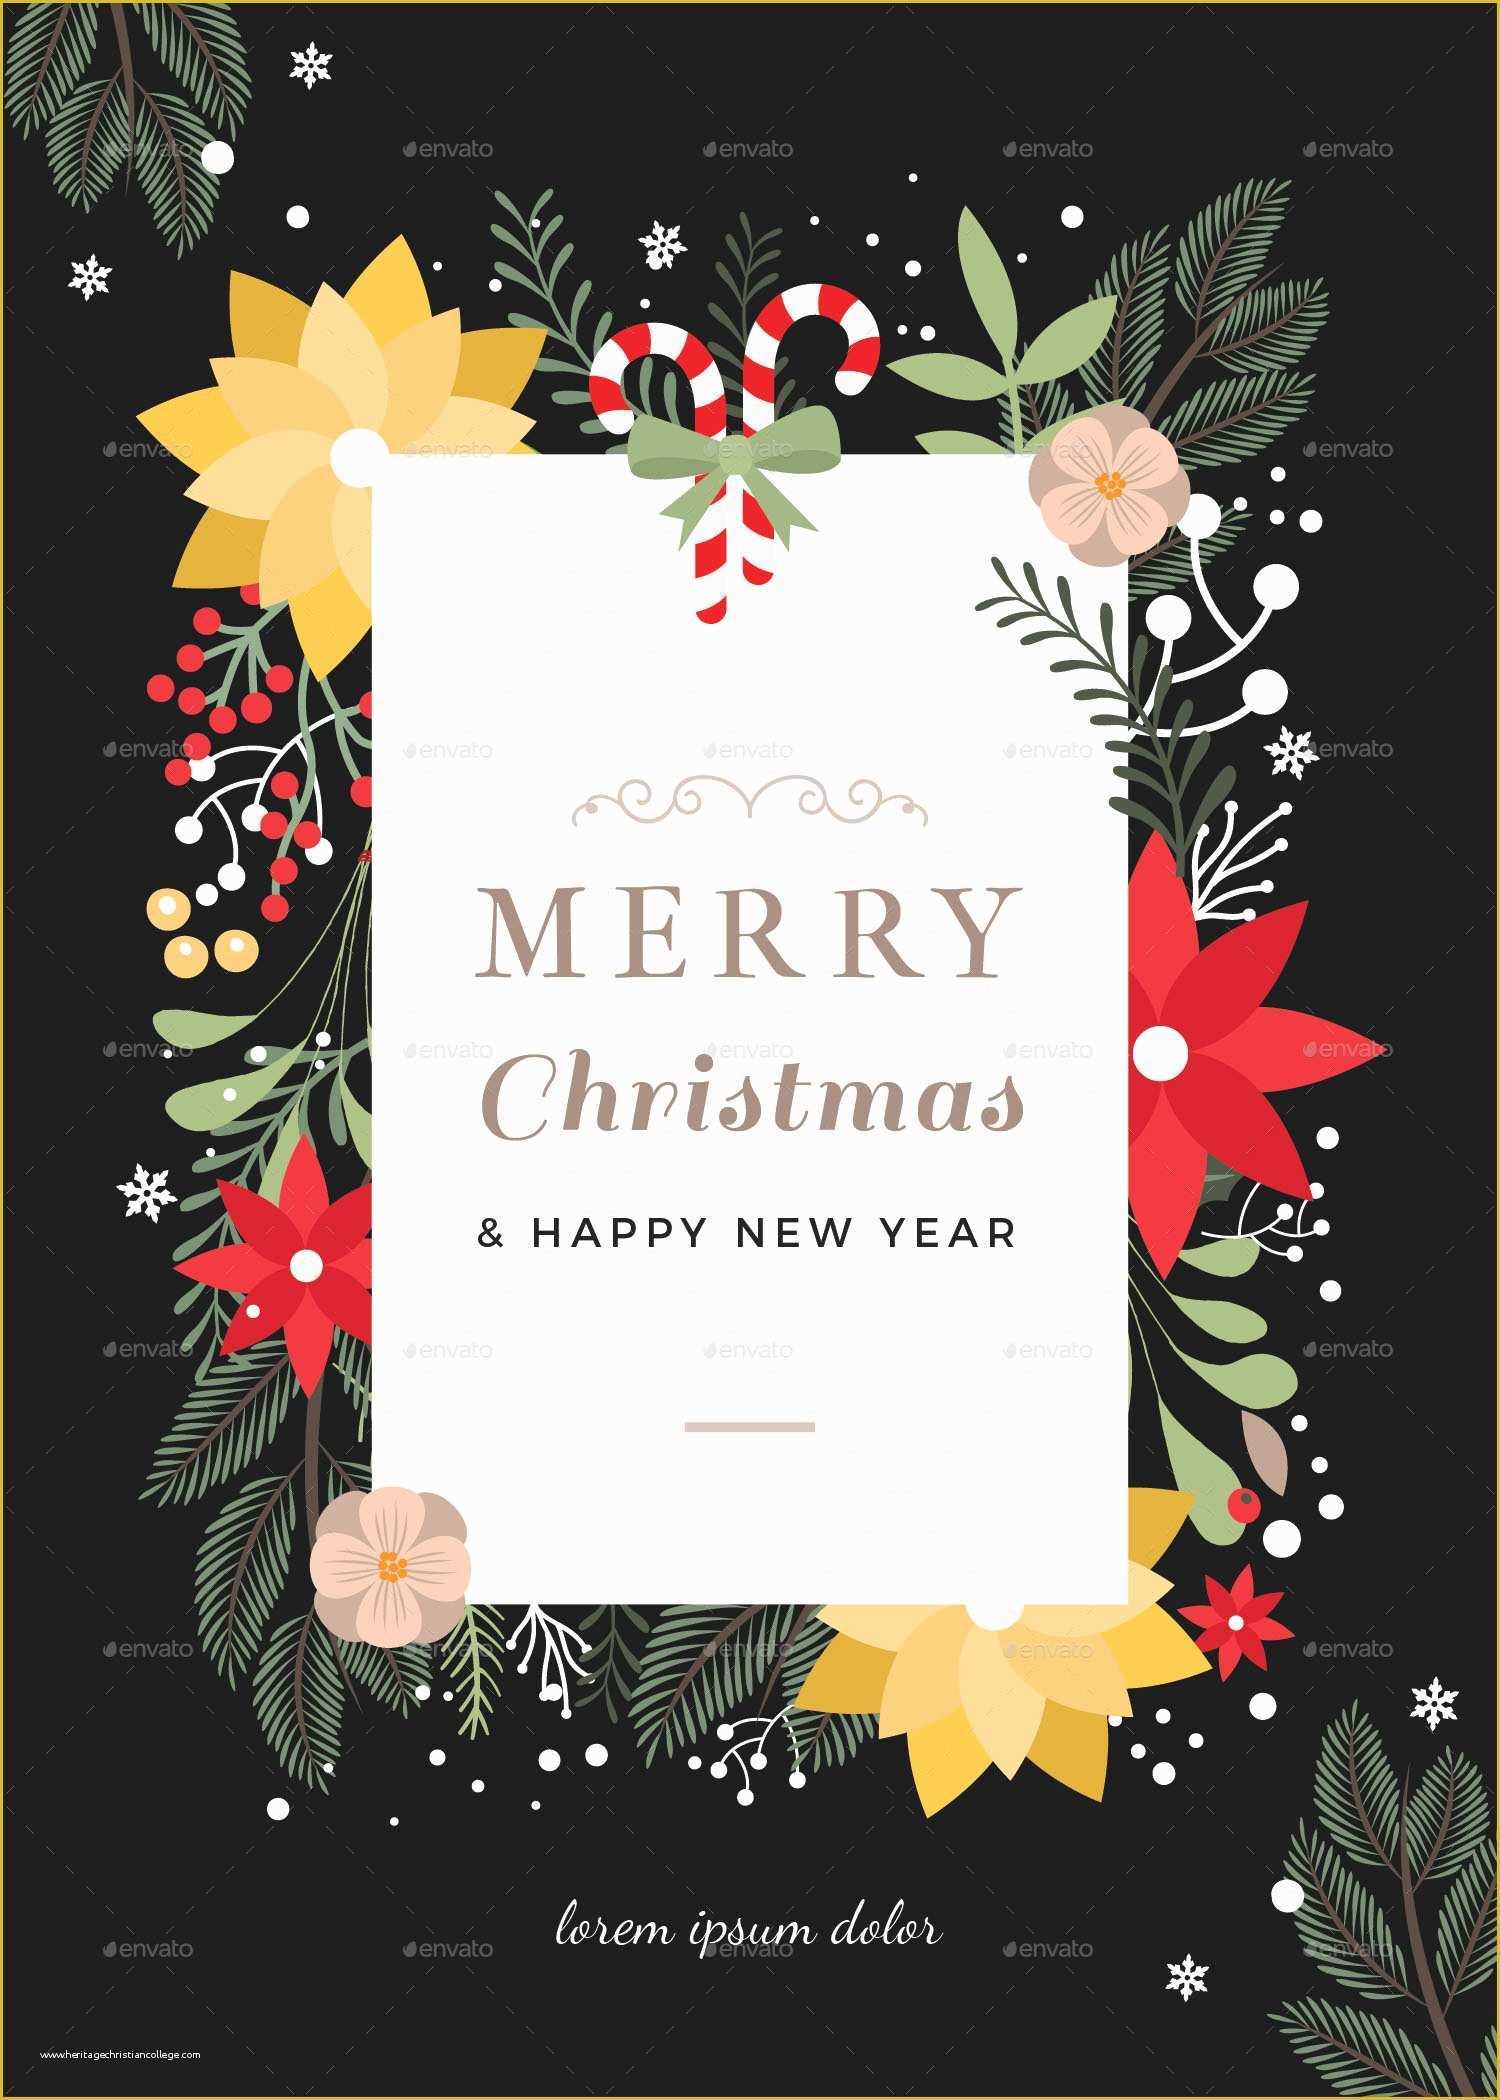 Christmas Cards Templates Free Downloads Of 45 Christmas Premium & Free Psd Holiday Card Templates for